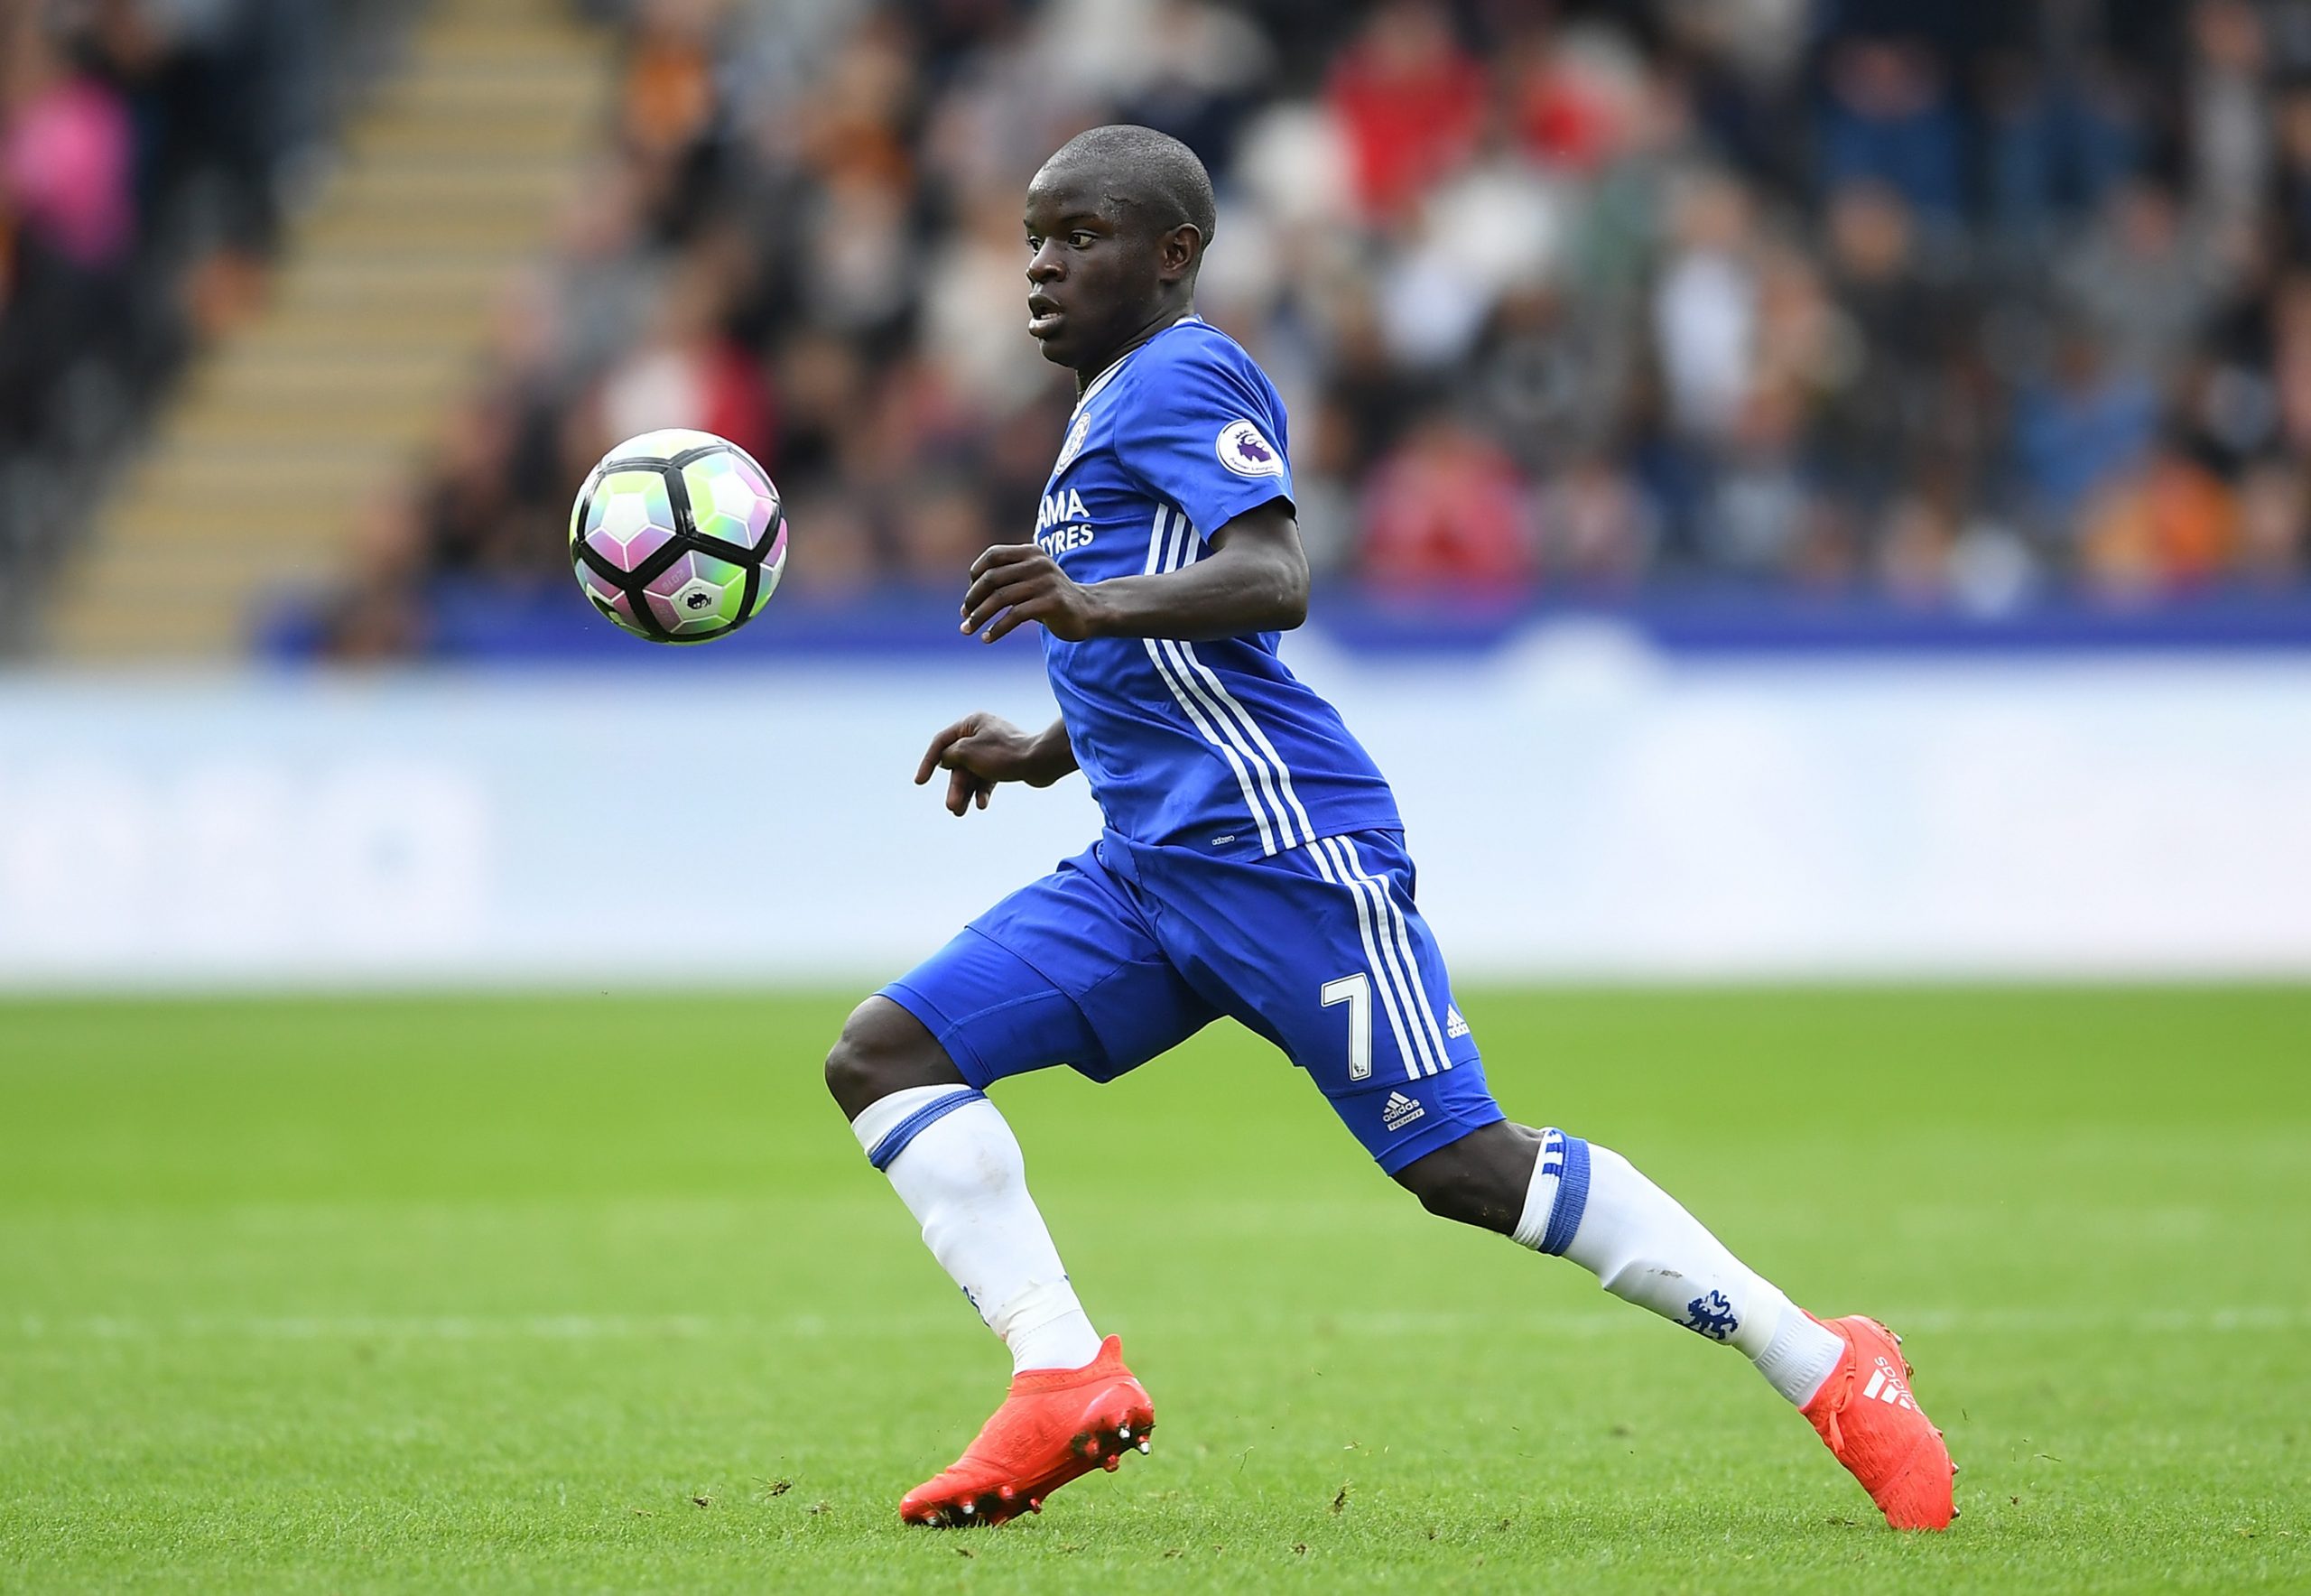 N'Golo Kante of Chelsea has been linked with a move to Tottenham Hotspur.